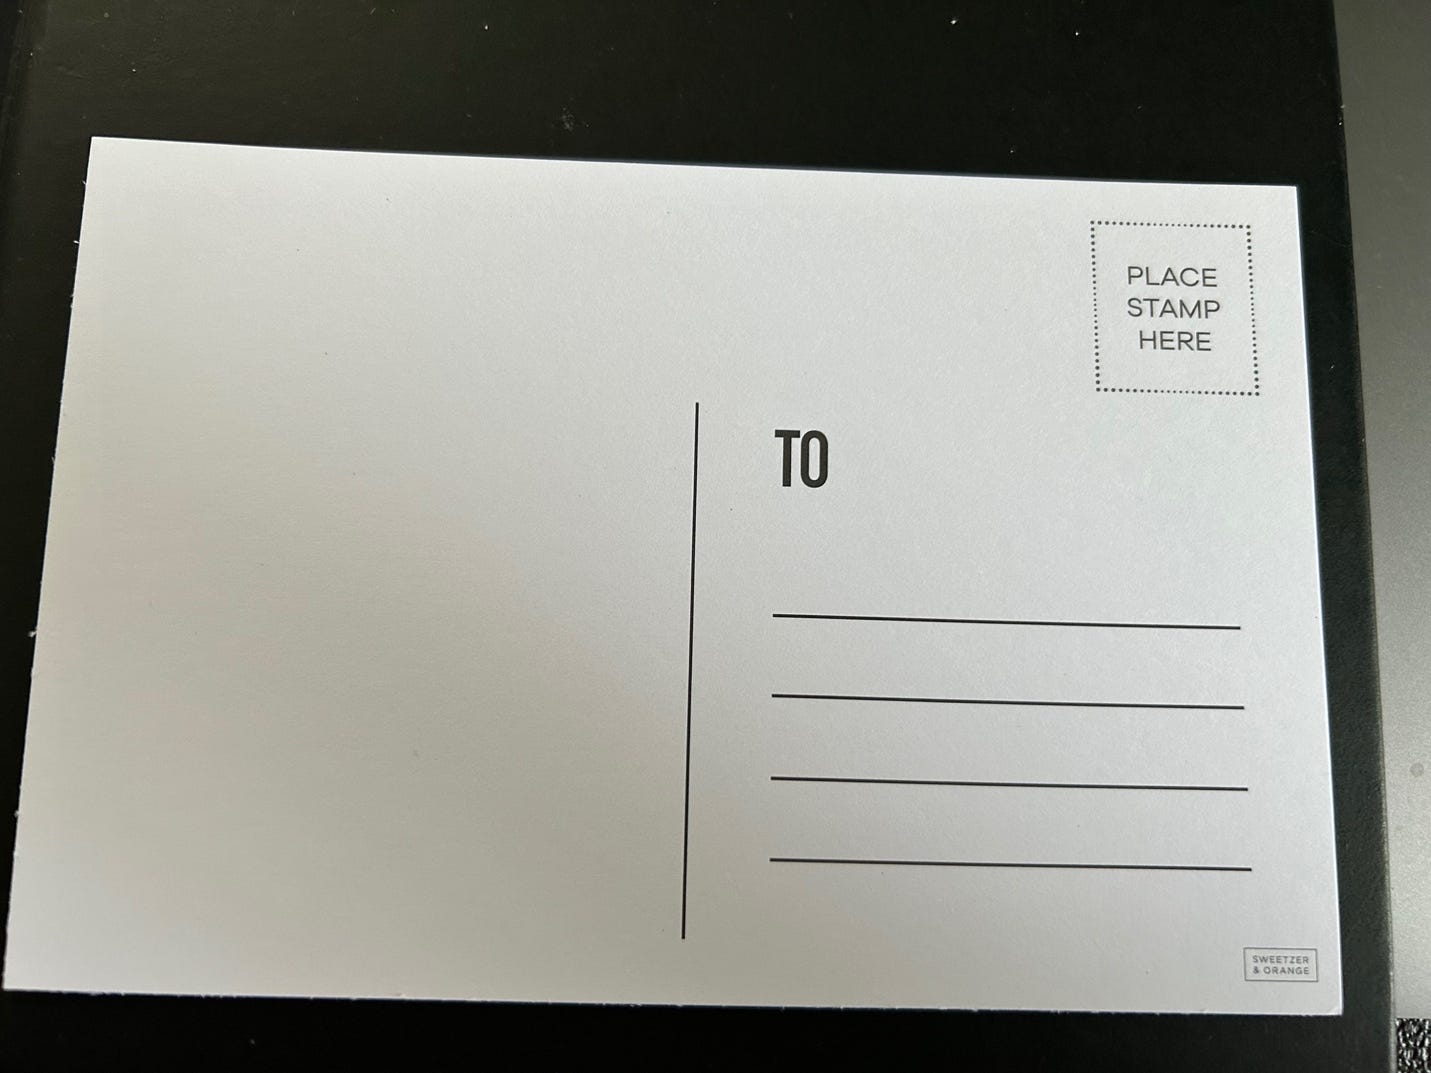 A white postcard with black text

Description automatically generated